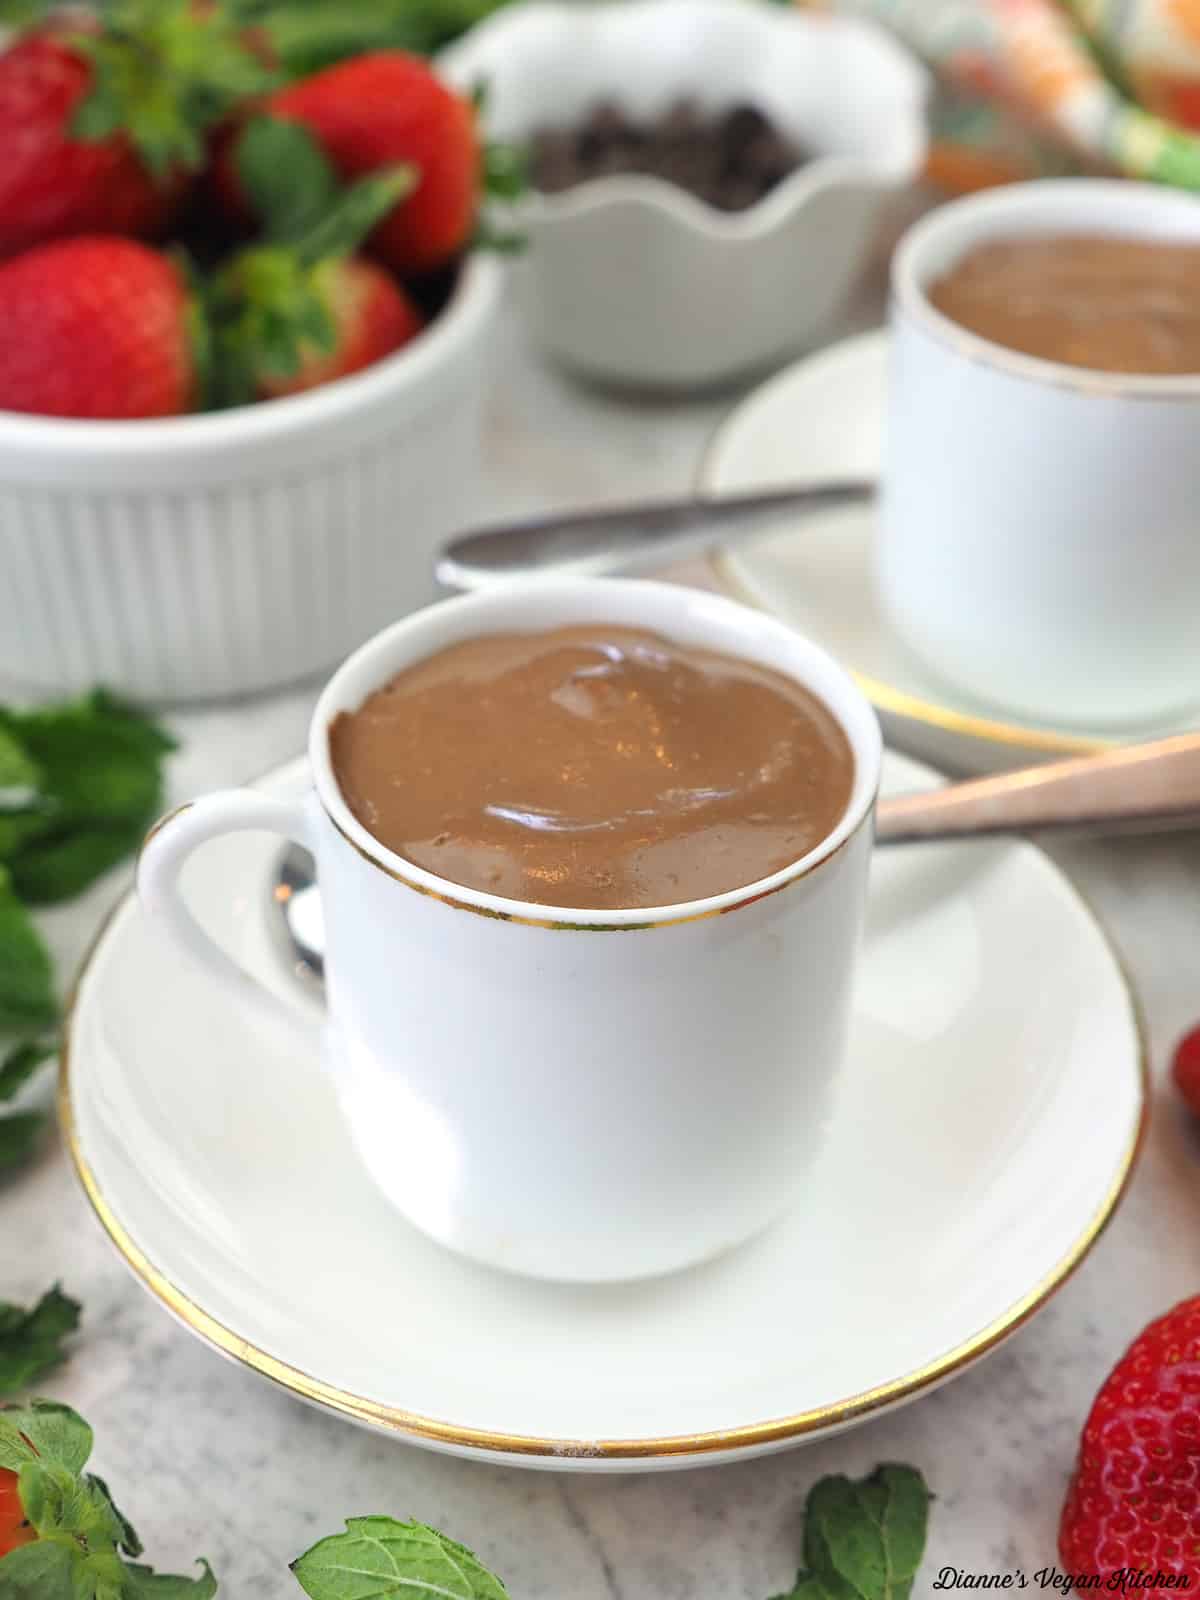 two cups of pots de creme with strawberries